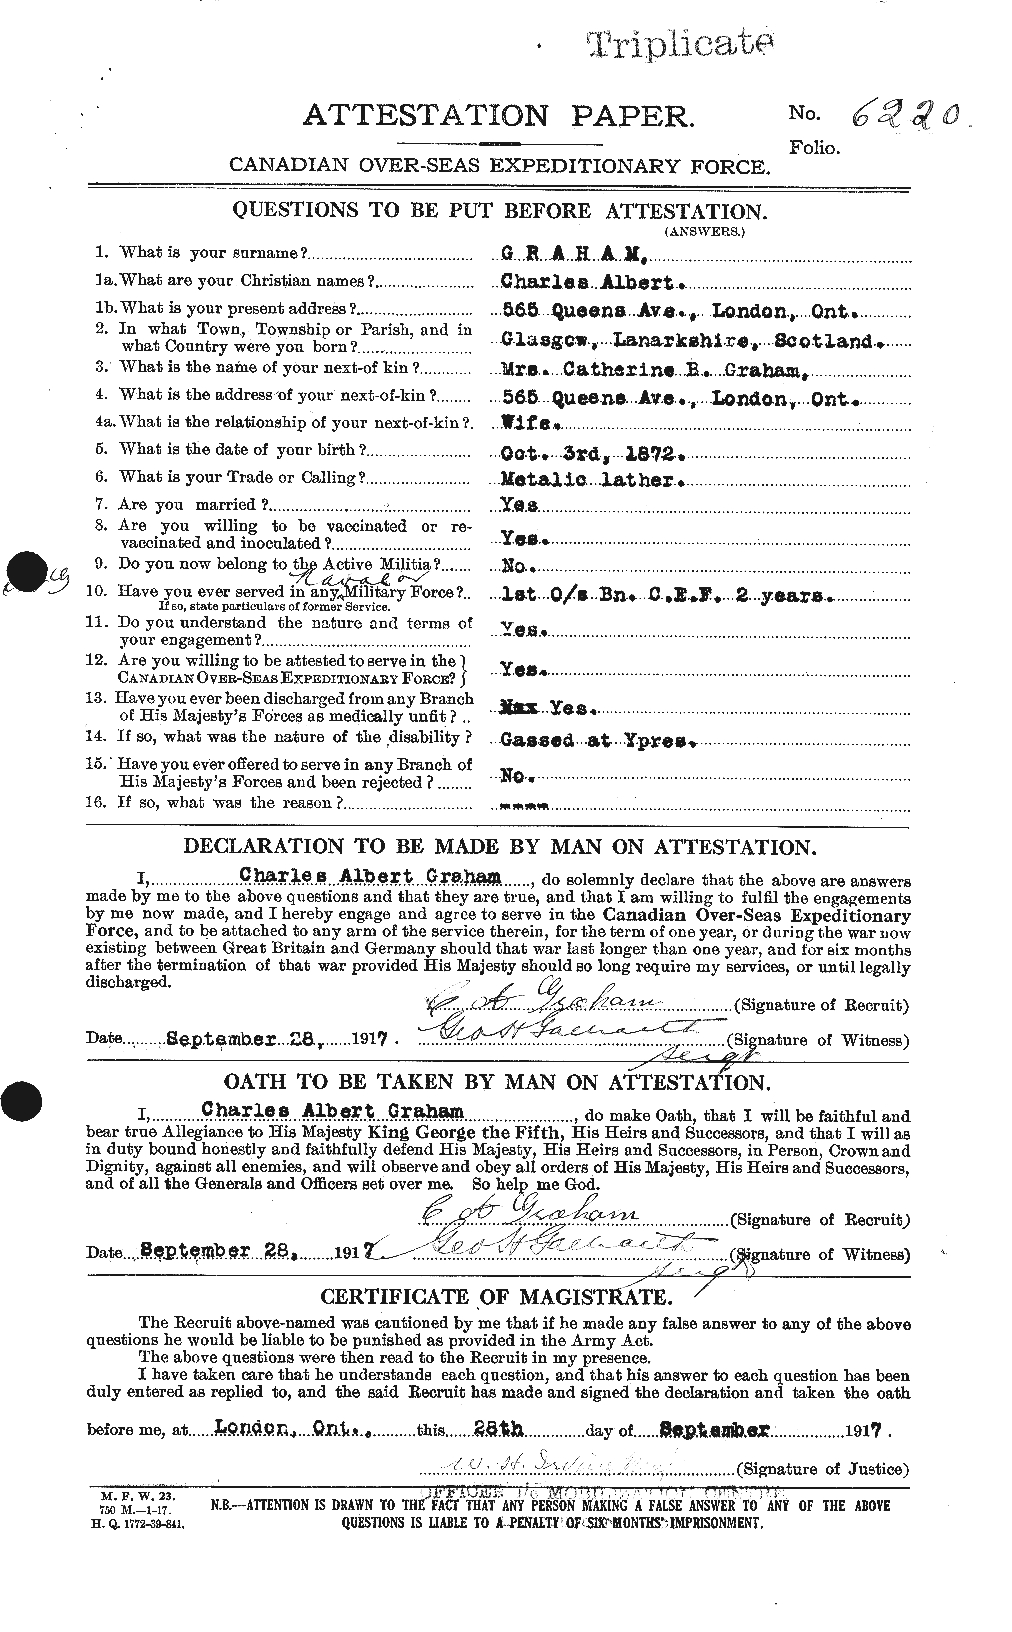 Personnel Records of the First World War - CEF 691143a